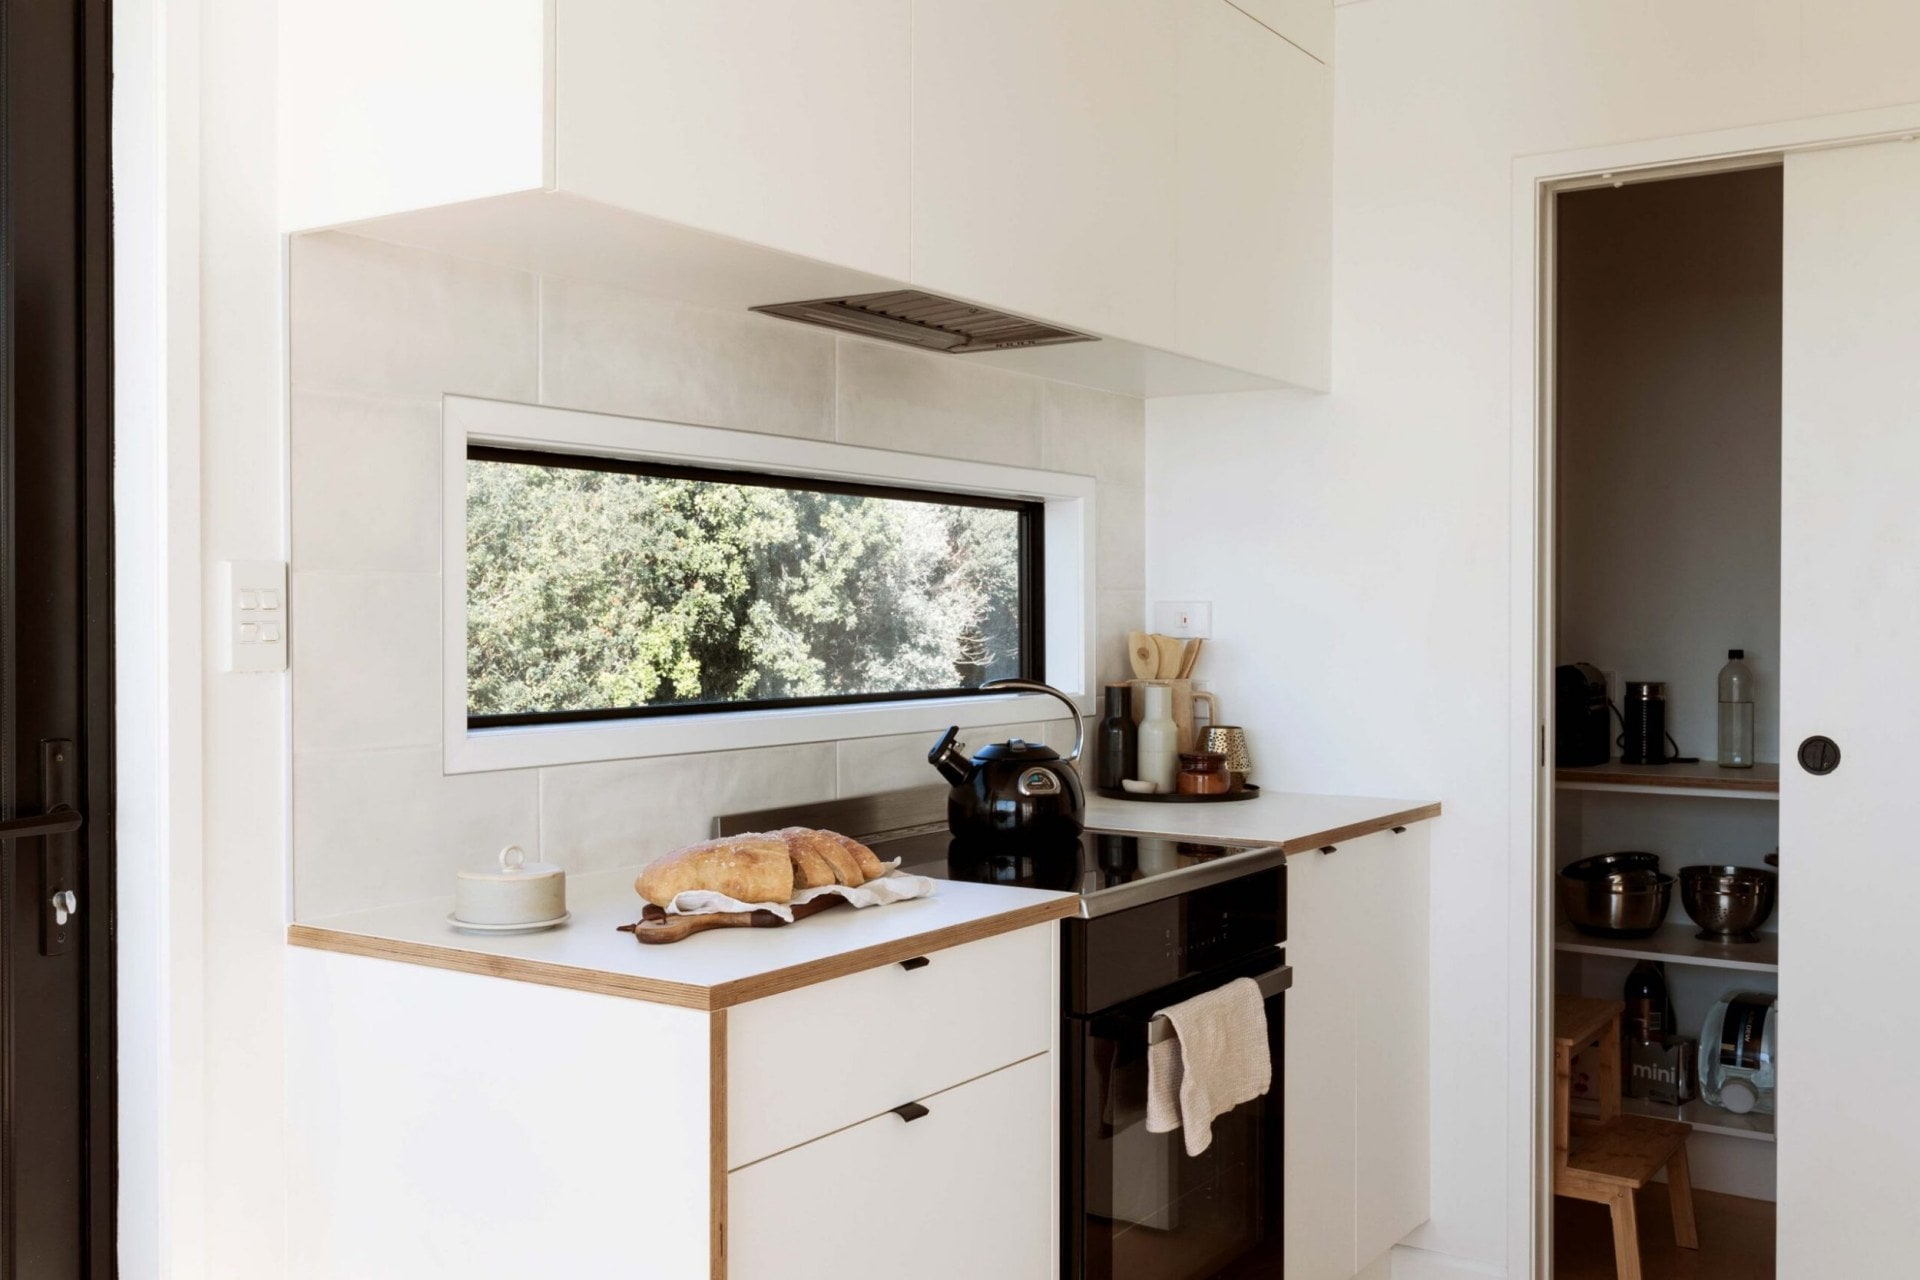 White kitchen cabinets with an oven and window above, with a view to a walk-in pantry